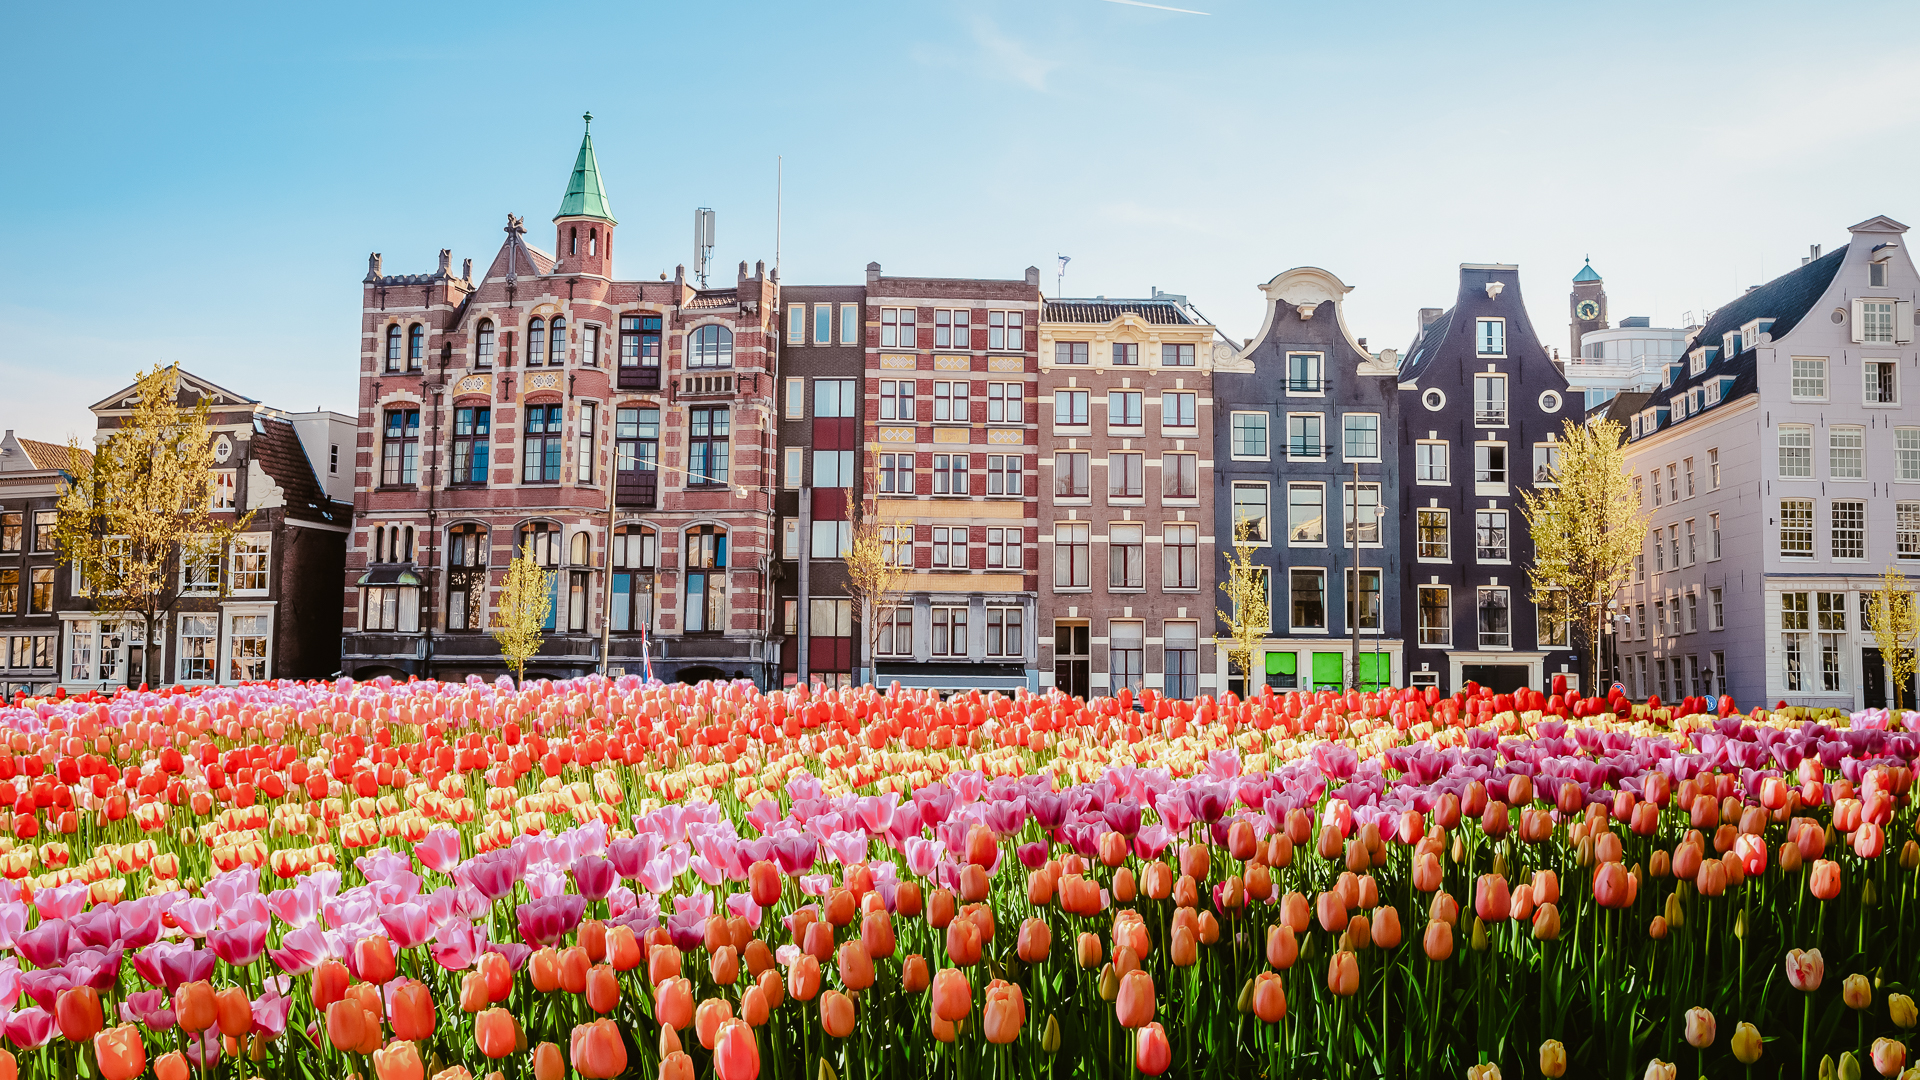 What looks like a field of red, pink and yellow tulips covers an entire area in front of traditional narrow old buildings in Amsterdam, one of the best places to visit in 2023.